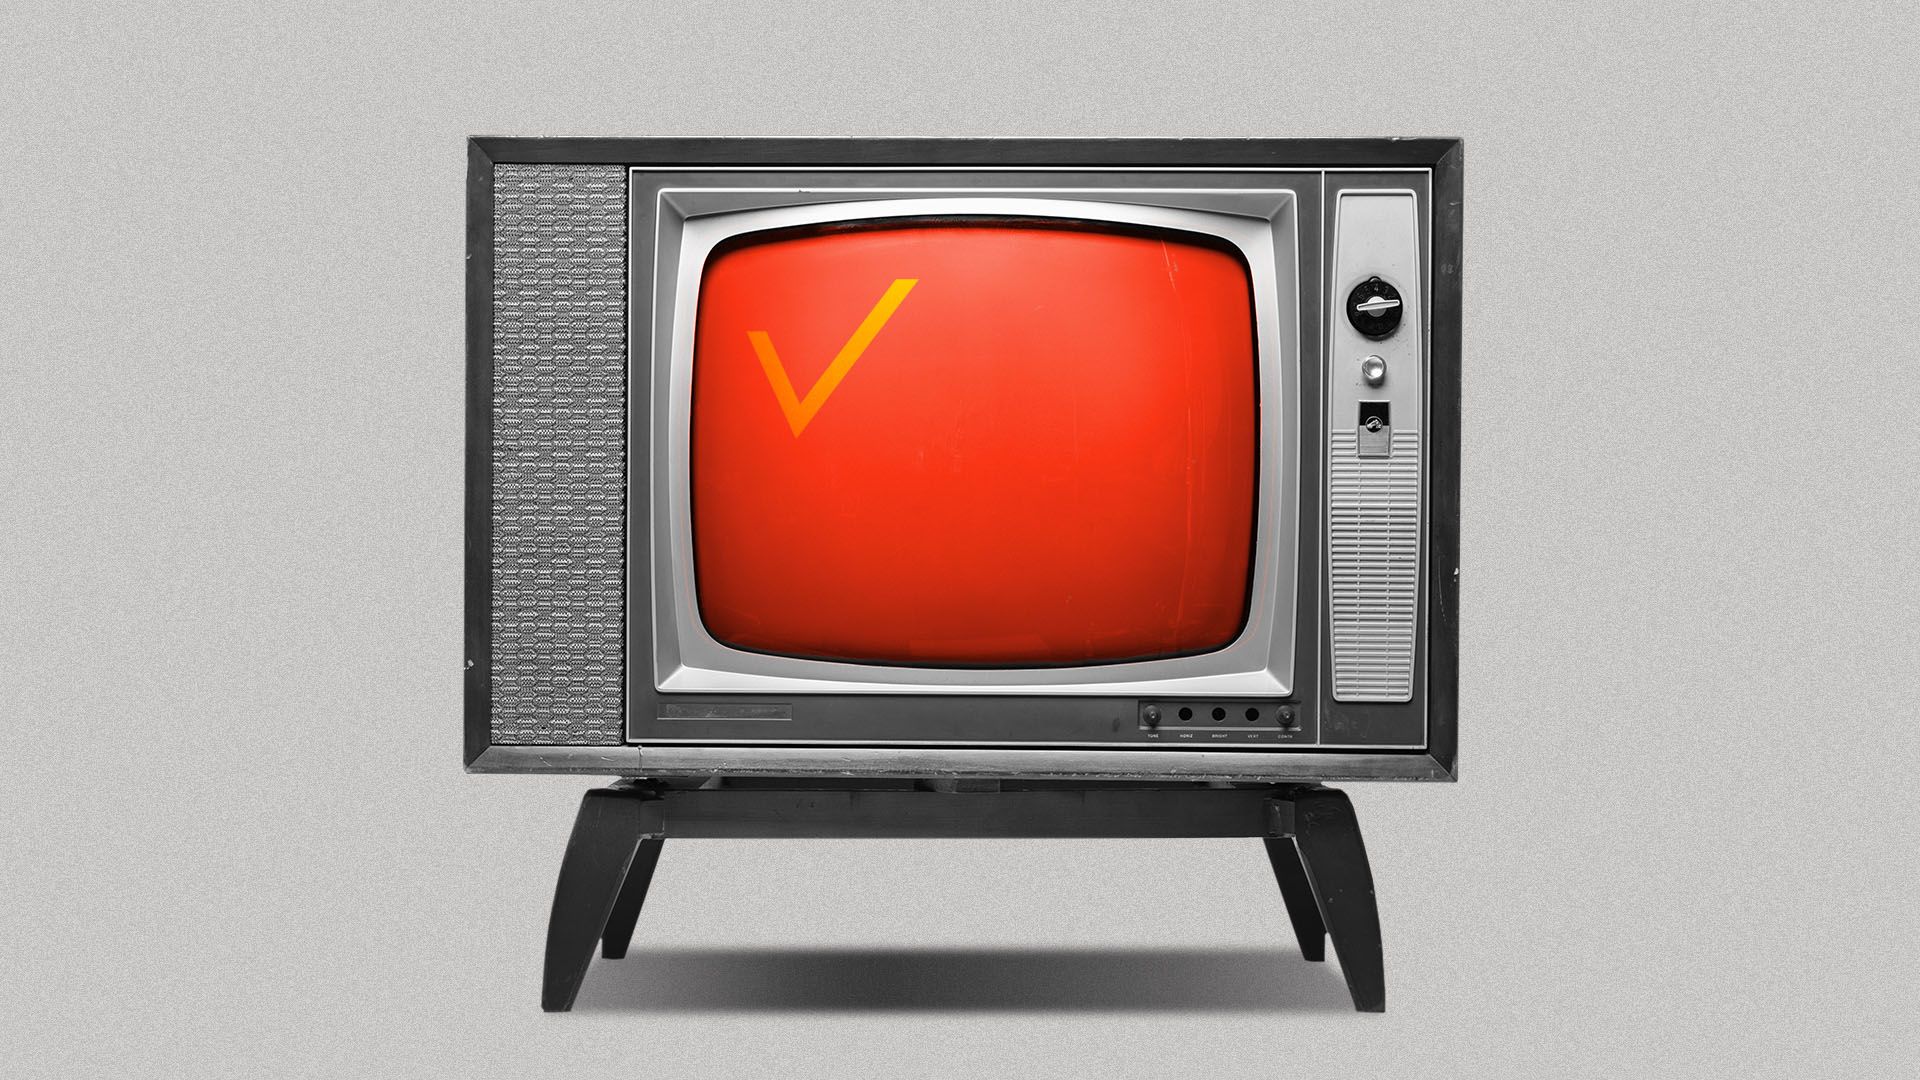 Illustration of a television featuring a red background and yellow check mark in reference to the flag of China